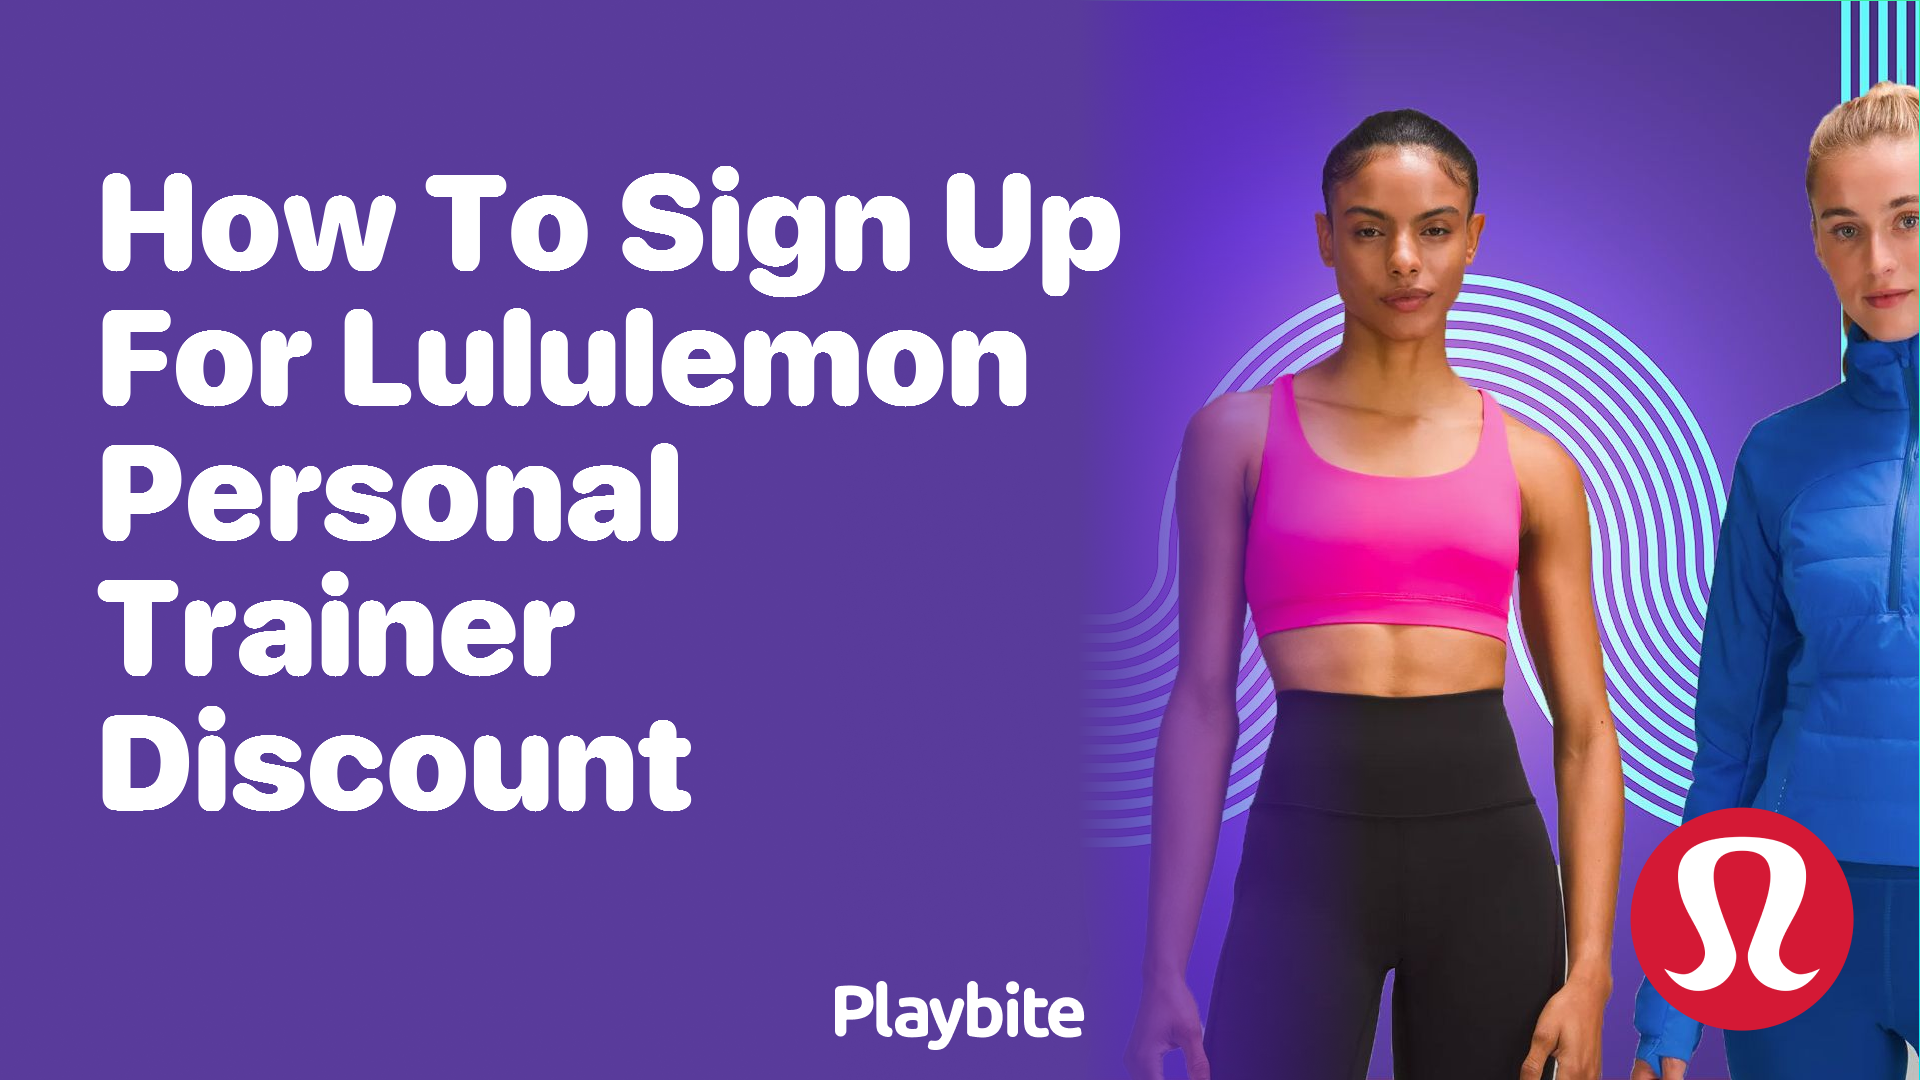 How to Sign Up for Lululemon Personal Trainer Discount - Playbite